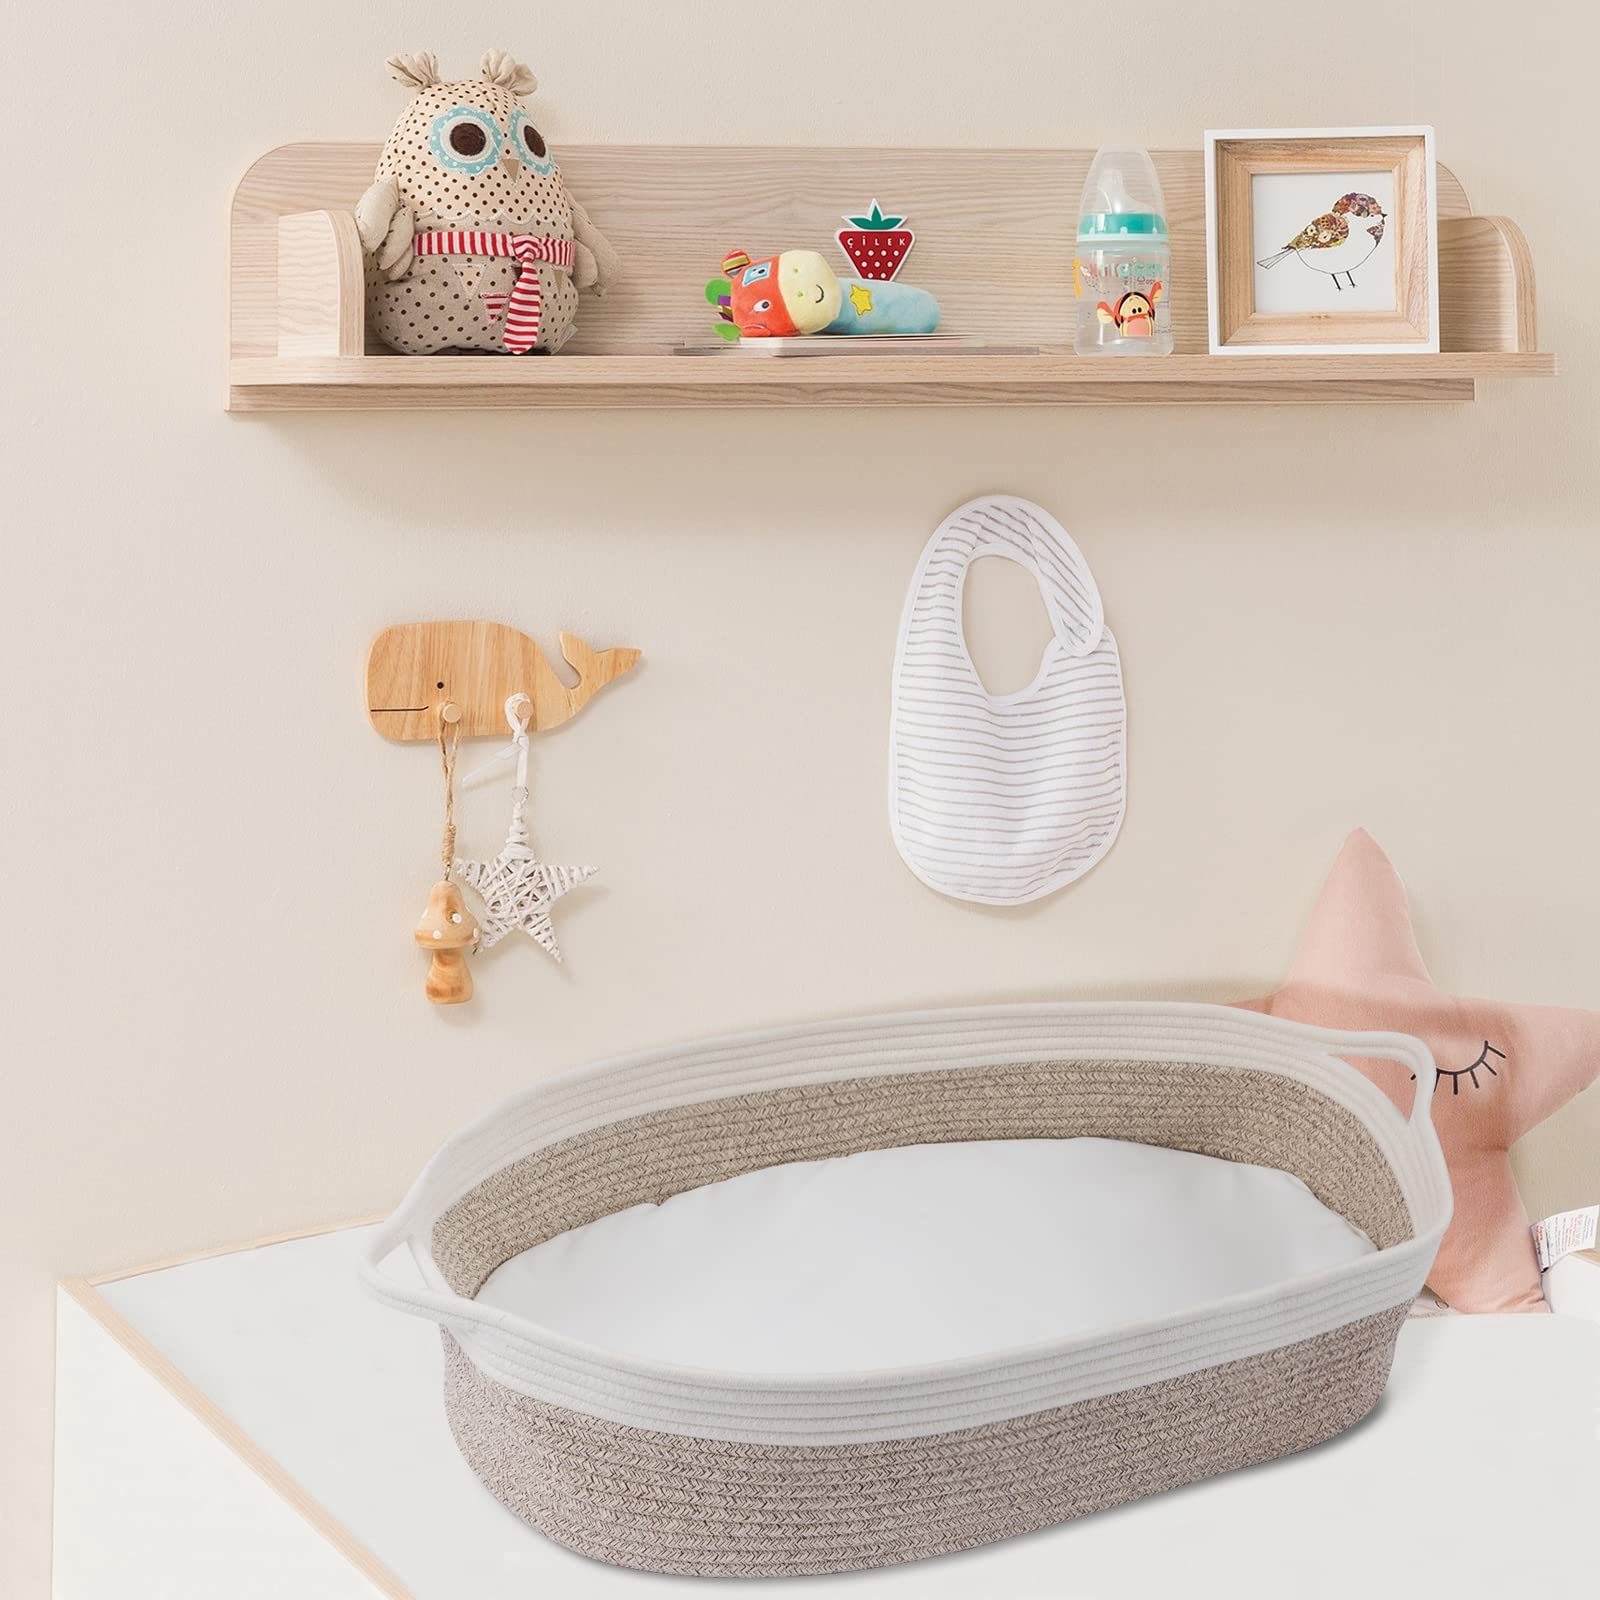 Baby Changing Basket - Moses Basket Boho Nursery Decor Cotton Rope Changing Table Topper with Thick Cotton Foam Pad and Removable Waterproof Bamboo Mattress Cover